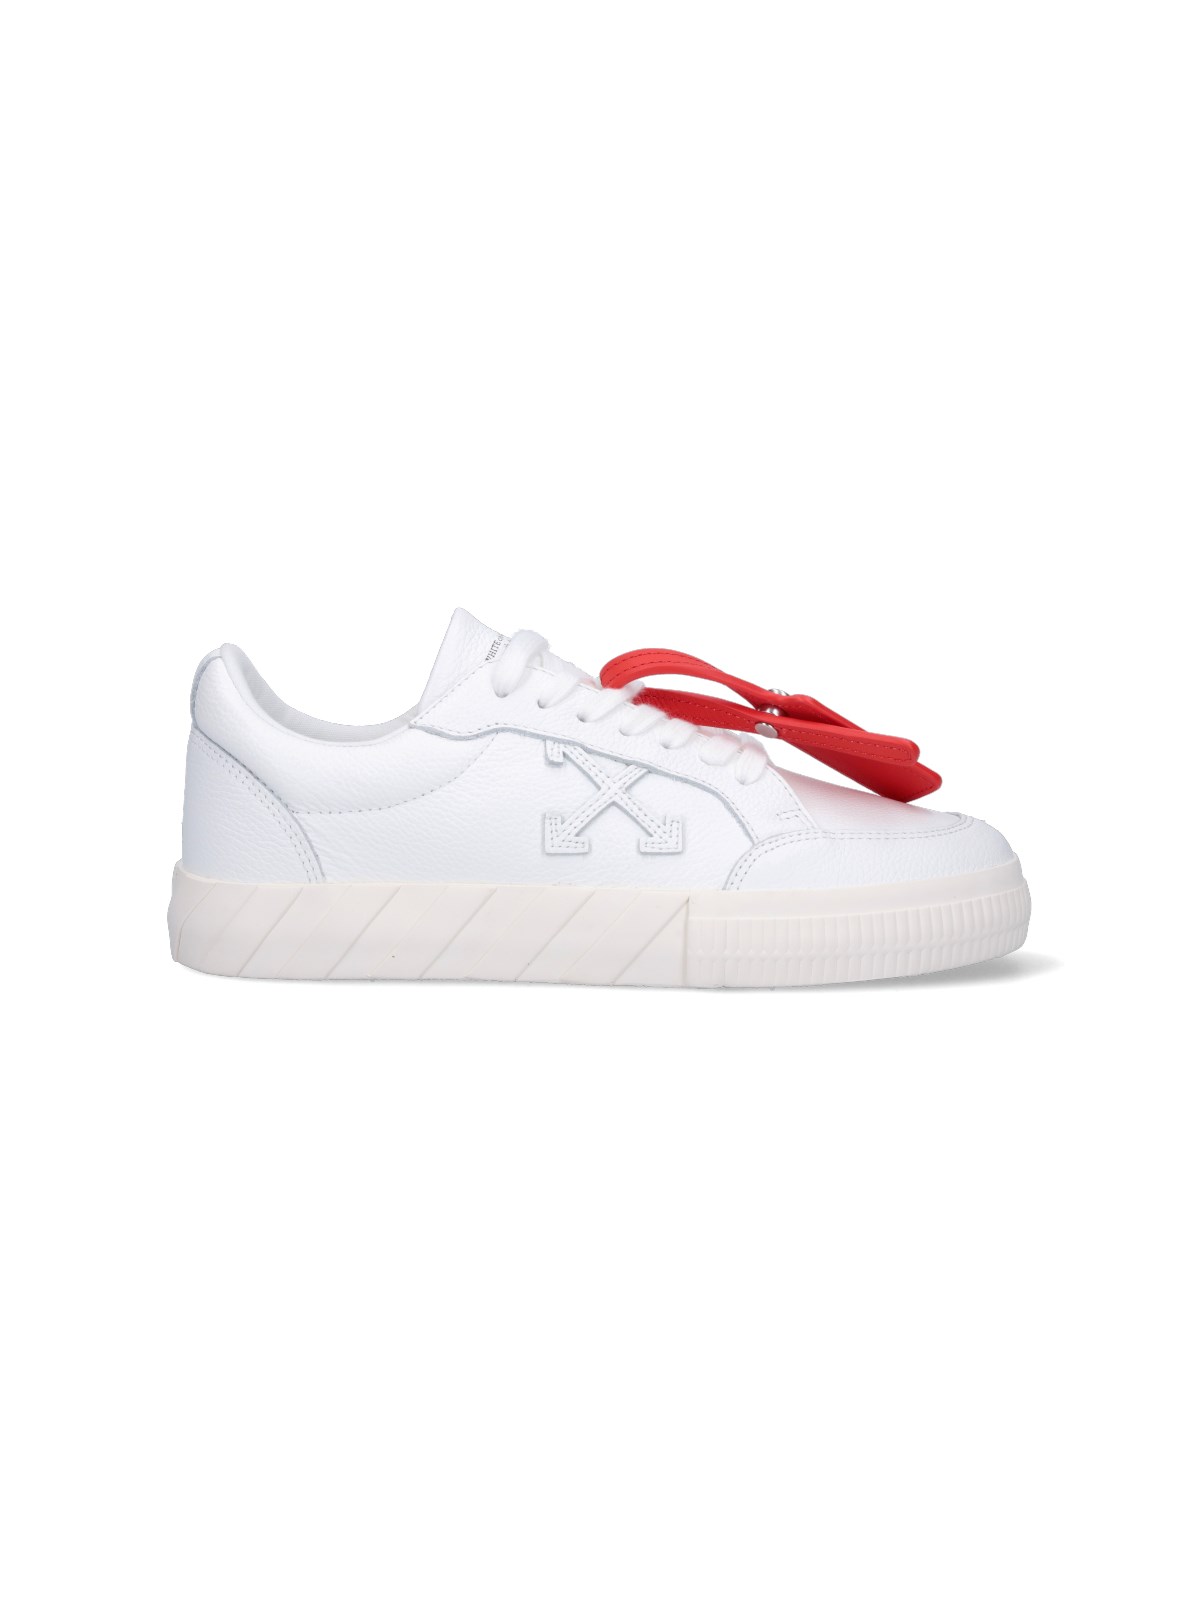 OFF-WHITE "VULCANIZED" SNEAKERS